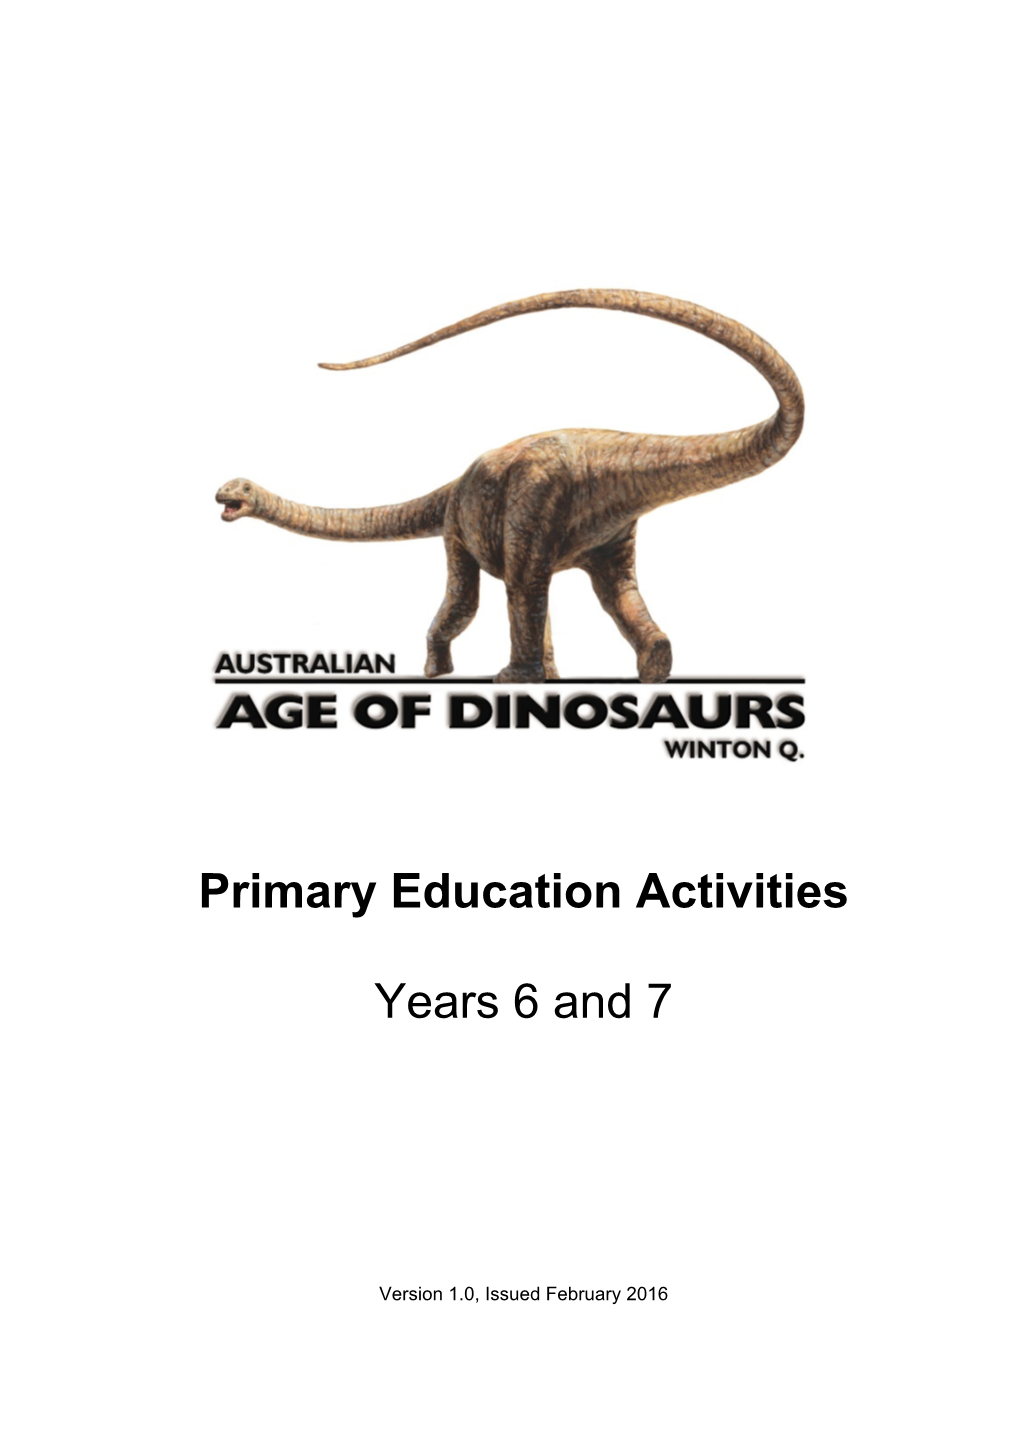 Primary Education Activities Years 6 and 7